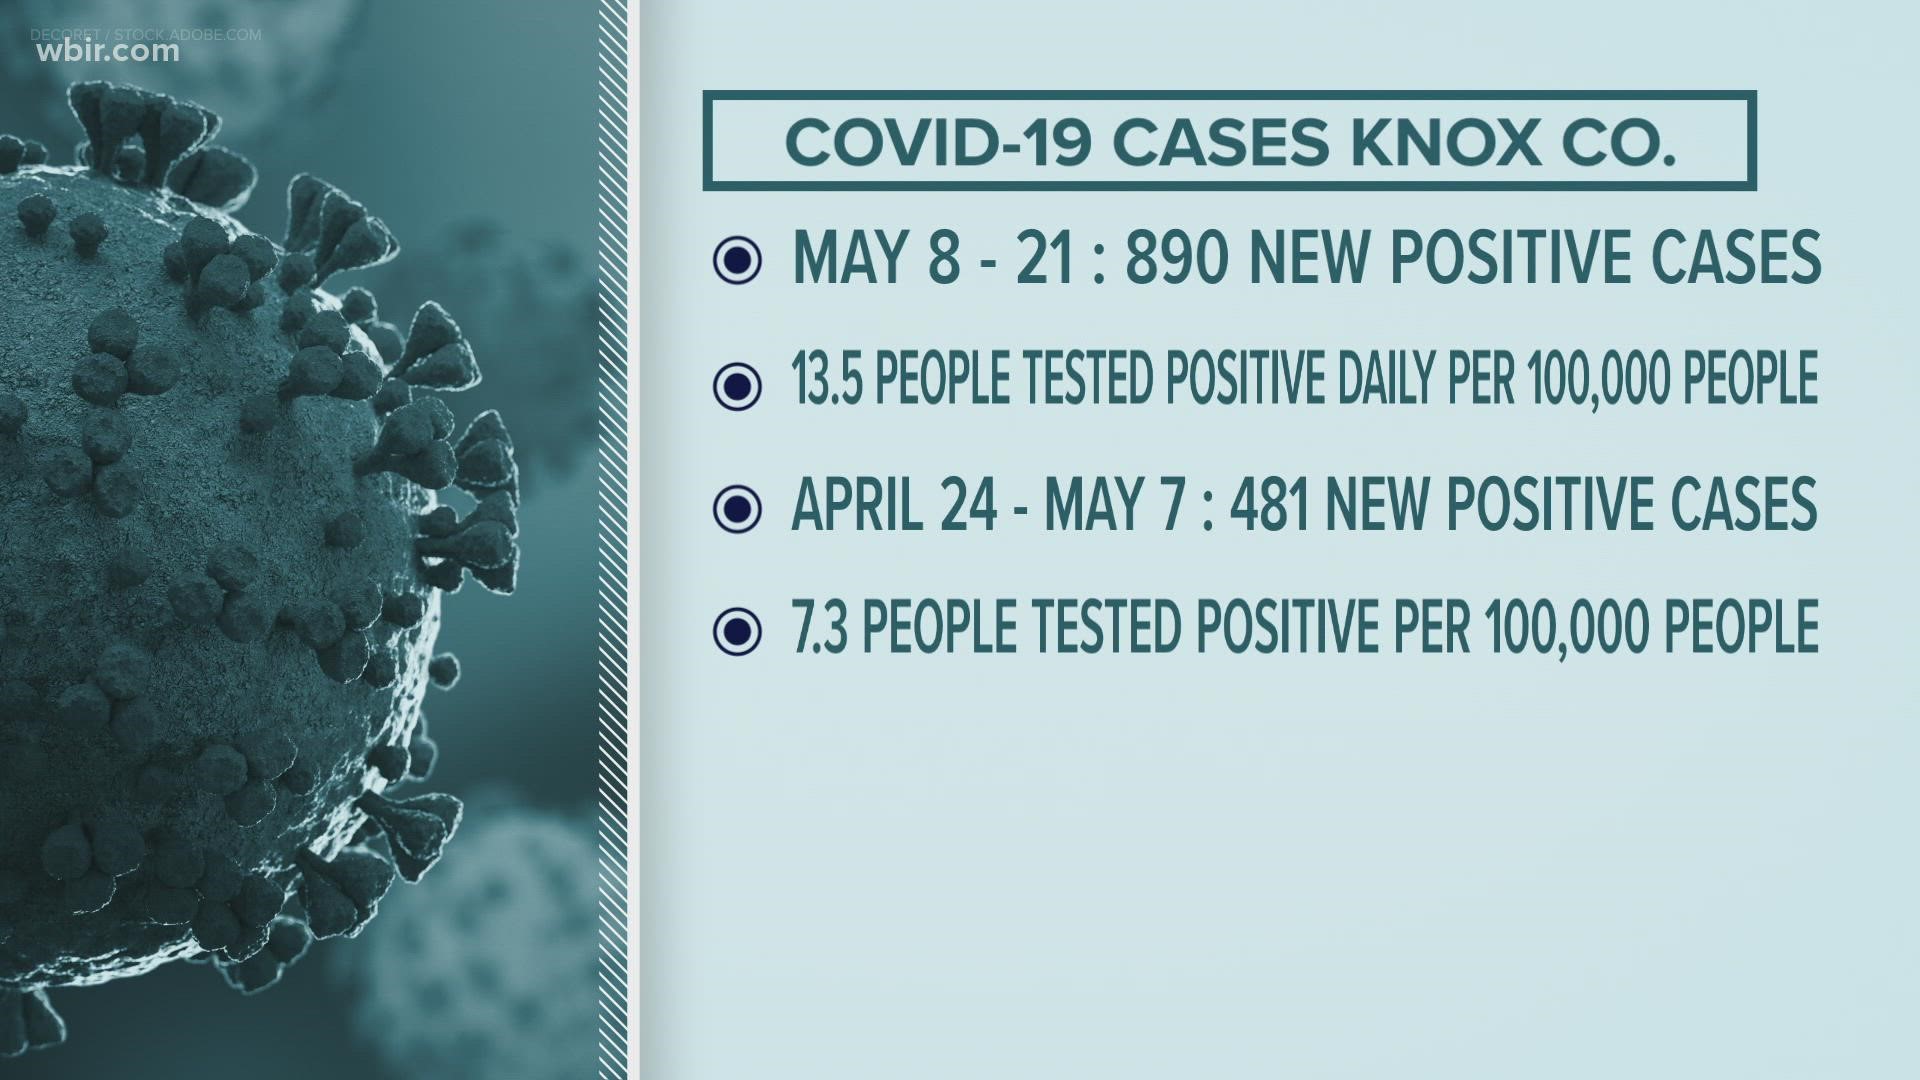 From May 8 through May 21, there were almost 900 new COVID-19 cases in Knox County.